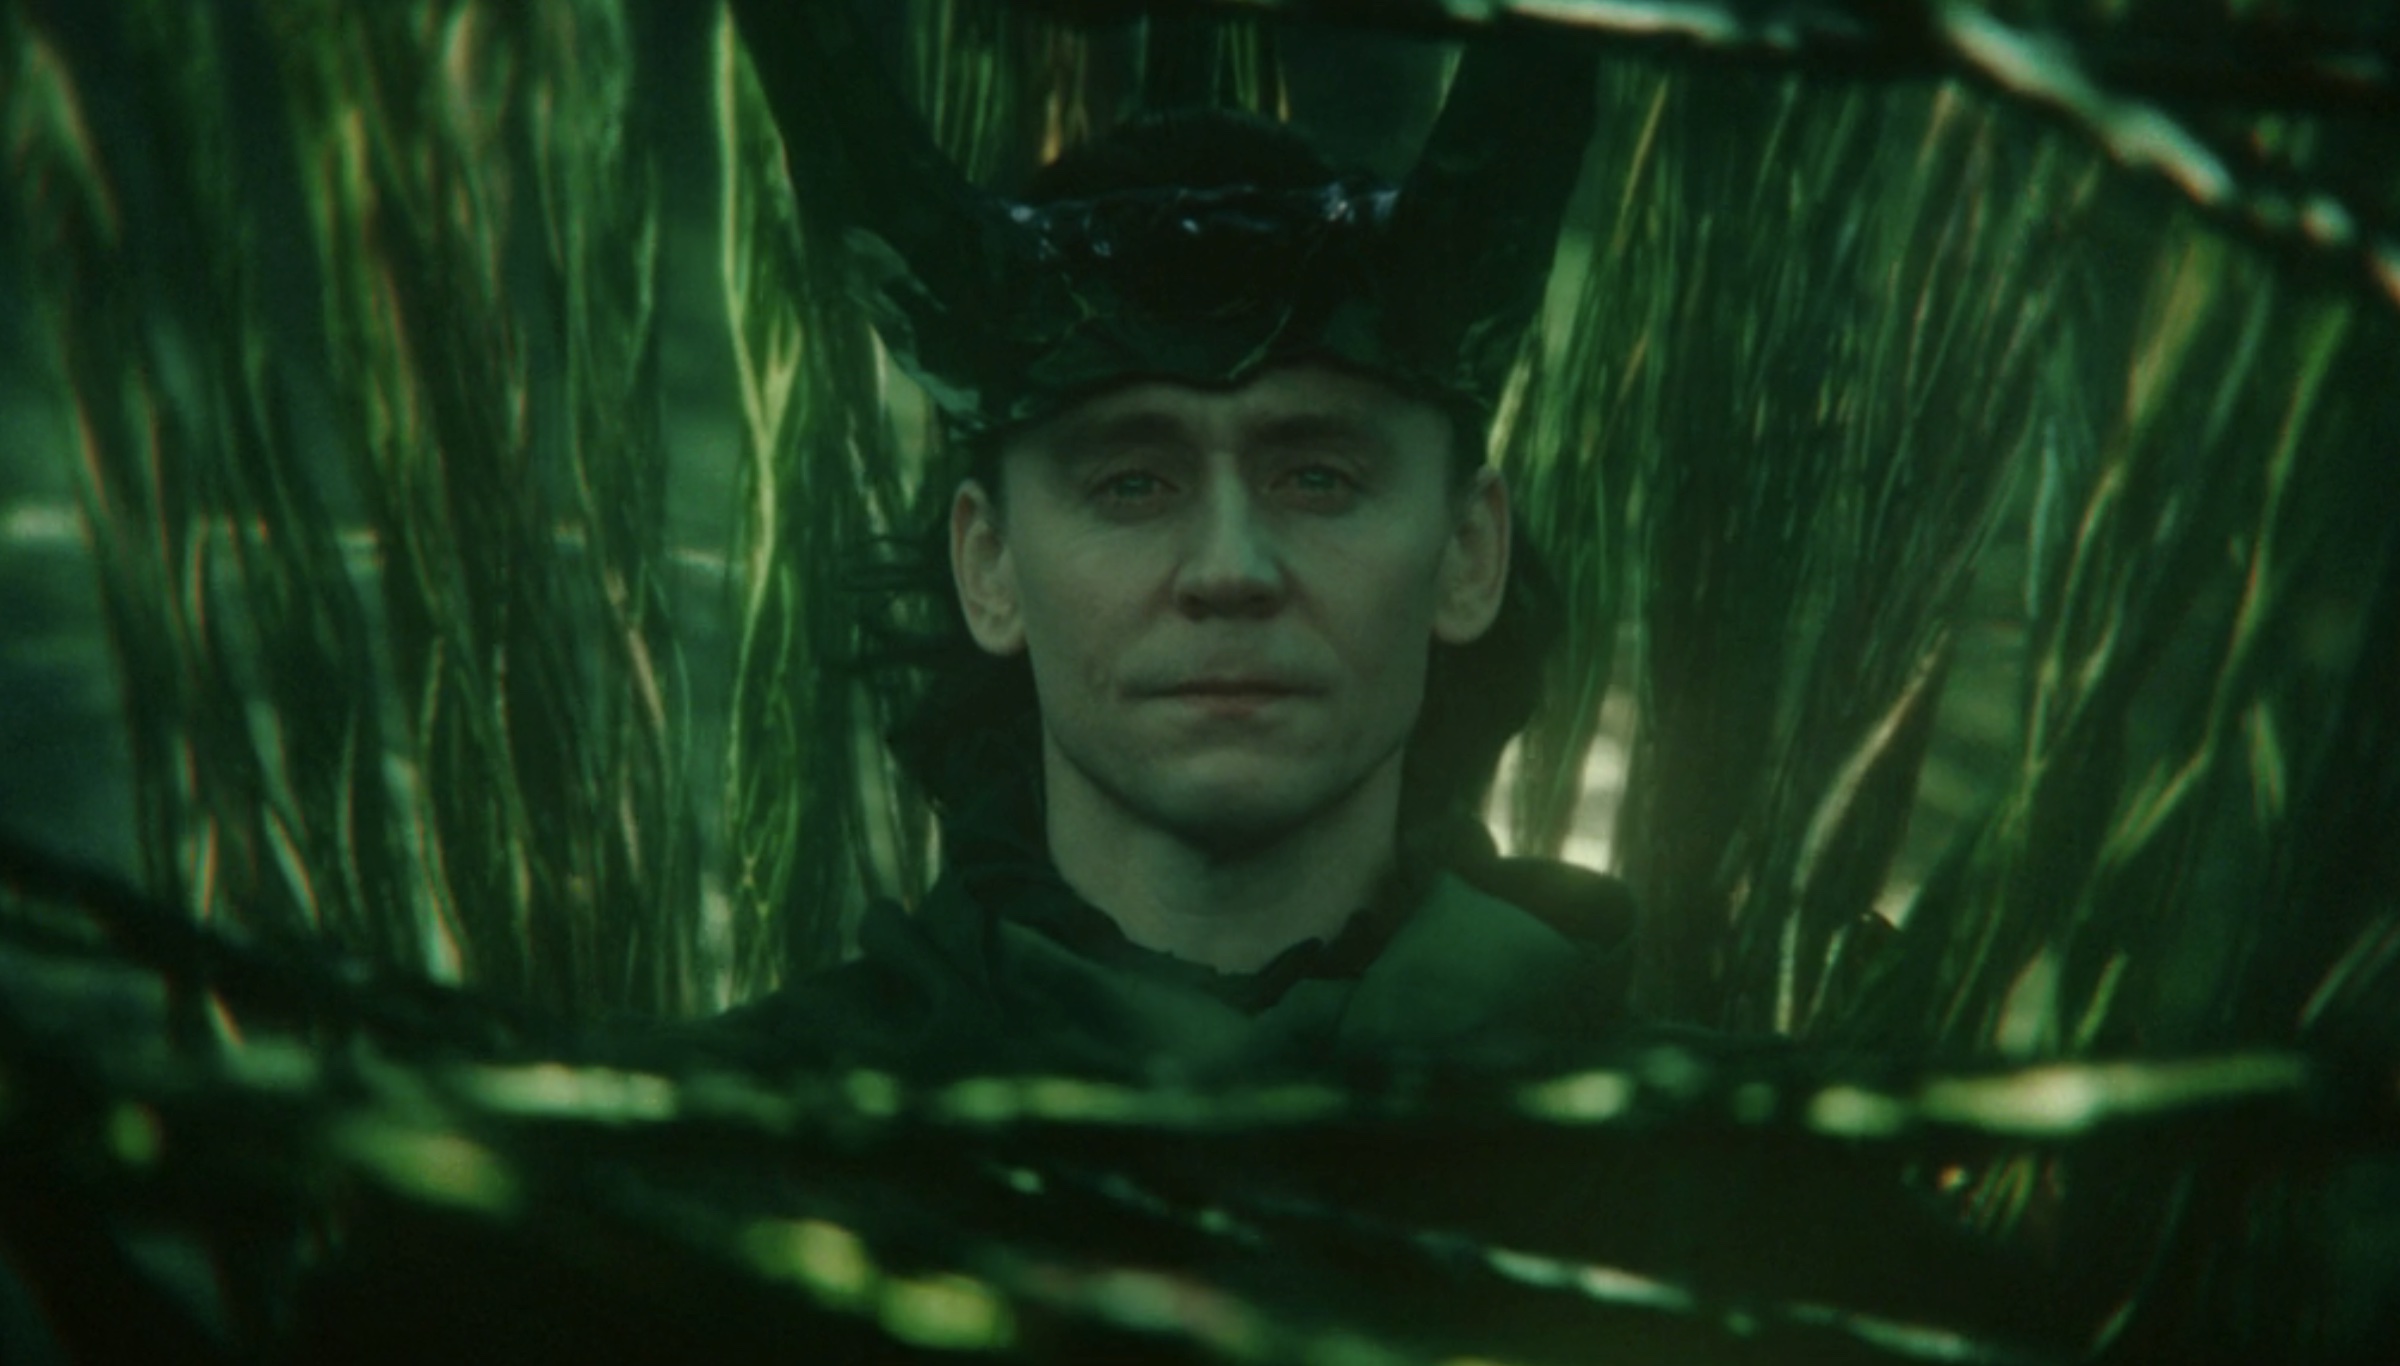 Loki wears a new crown of horns, surrounded by green strands of time.